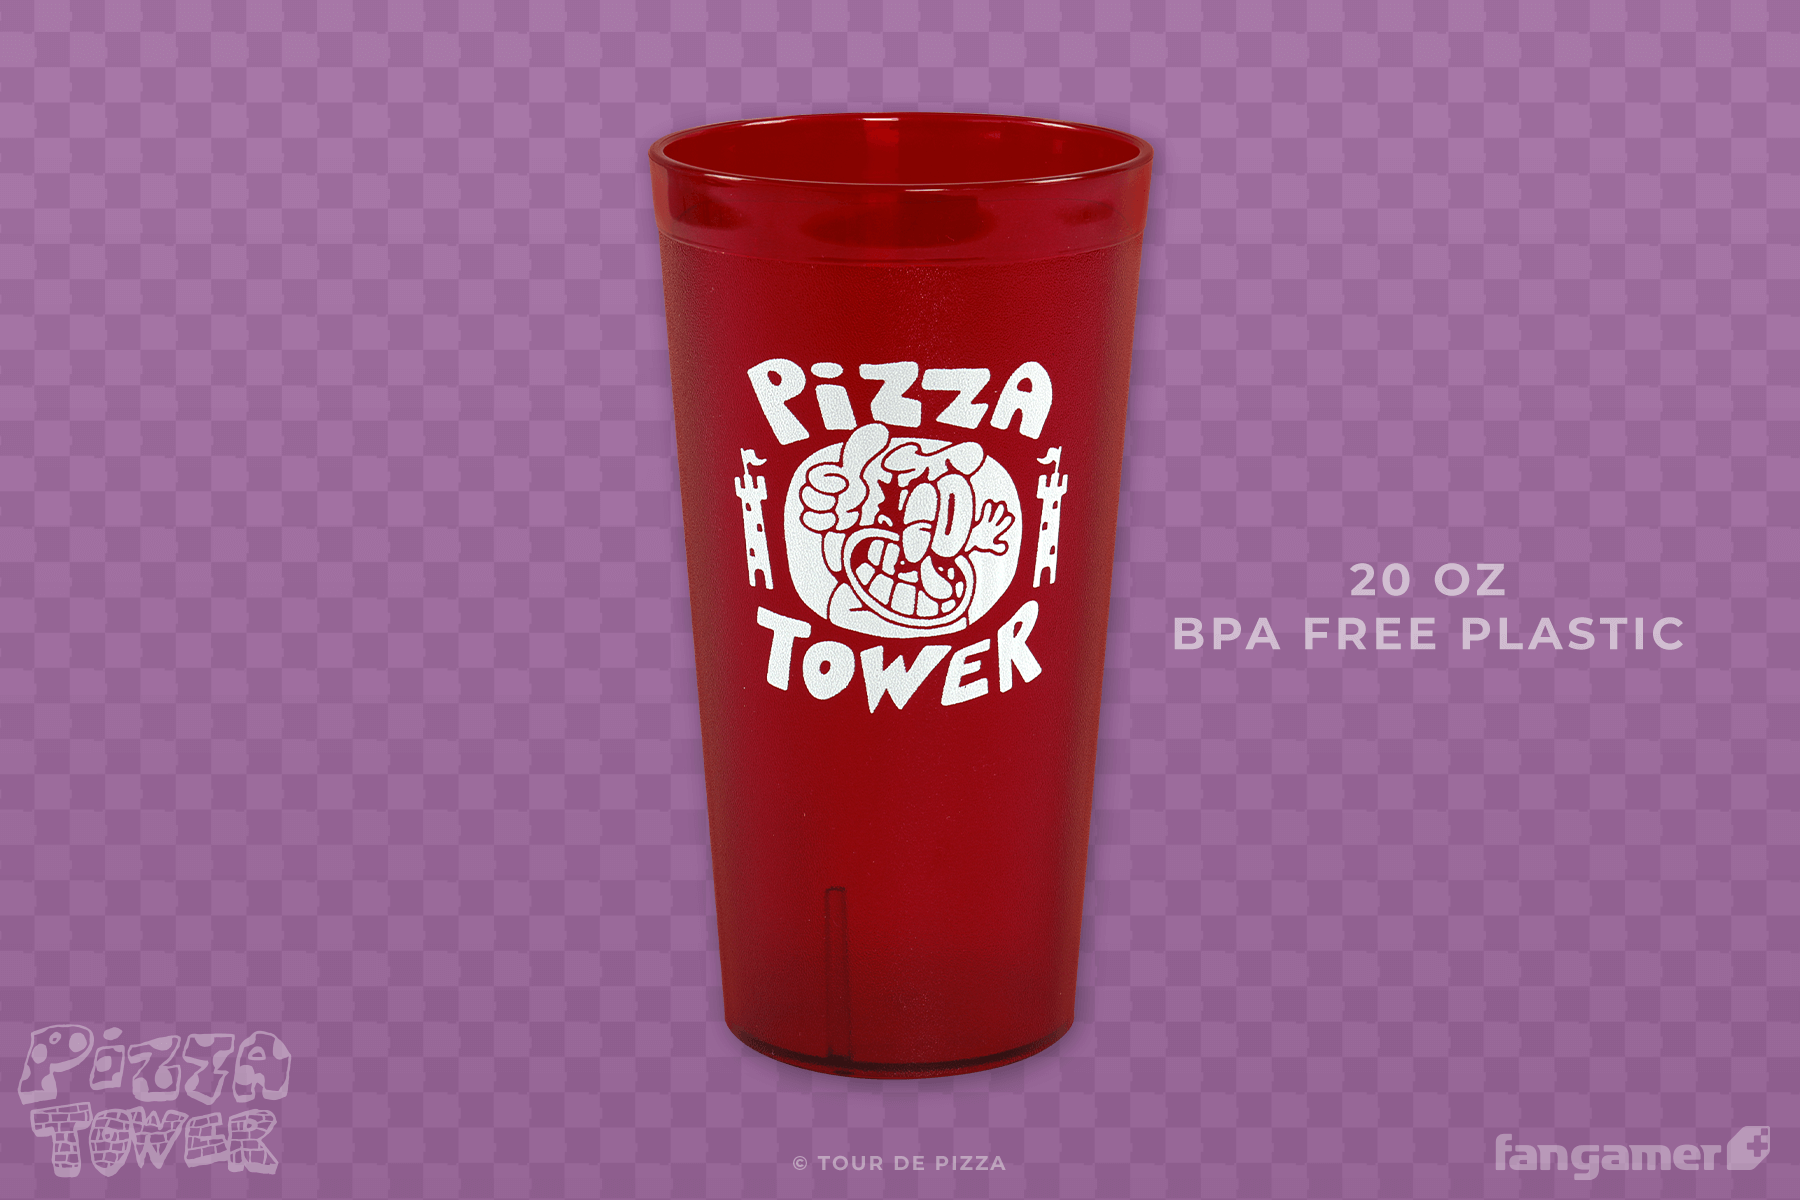 Pizza Tower - Fangamer